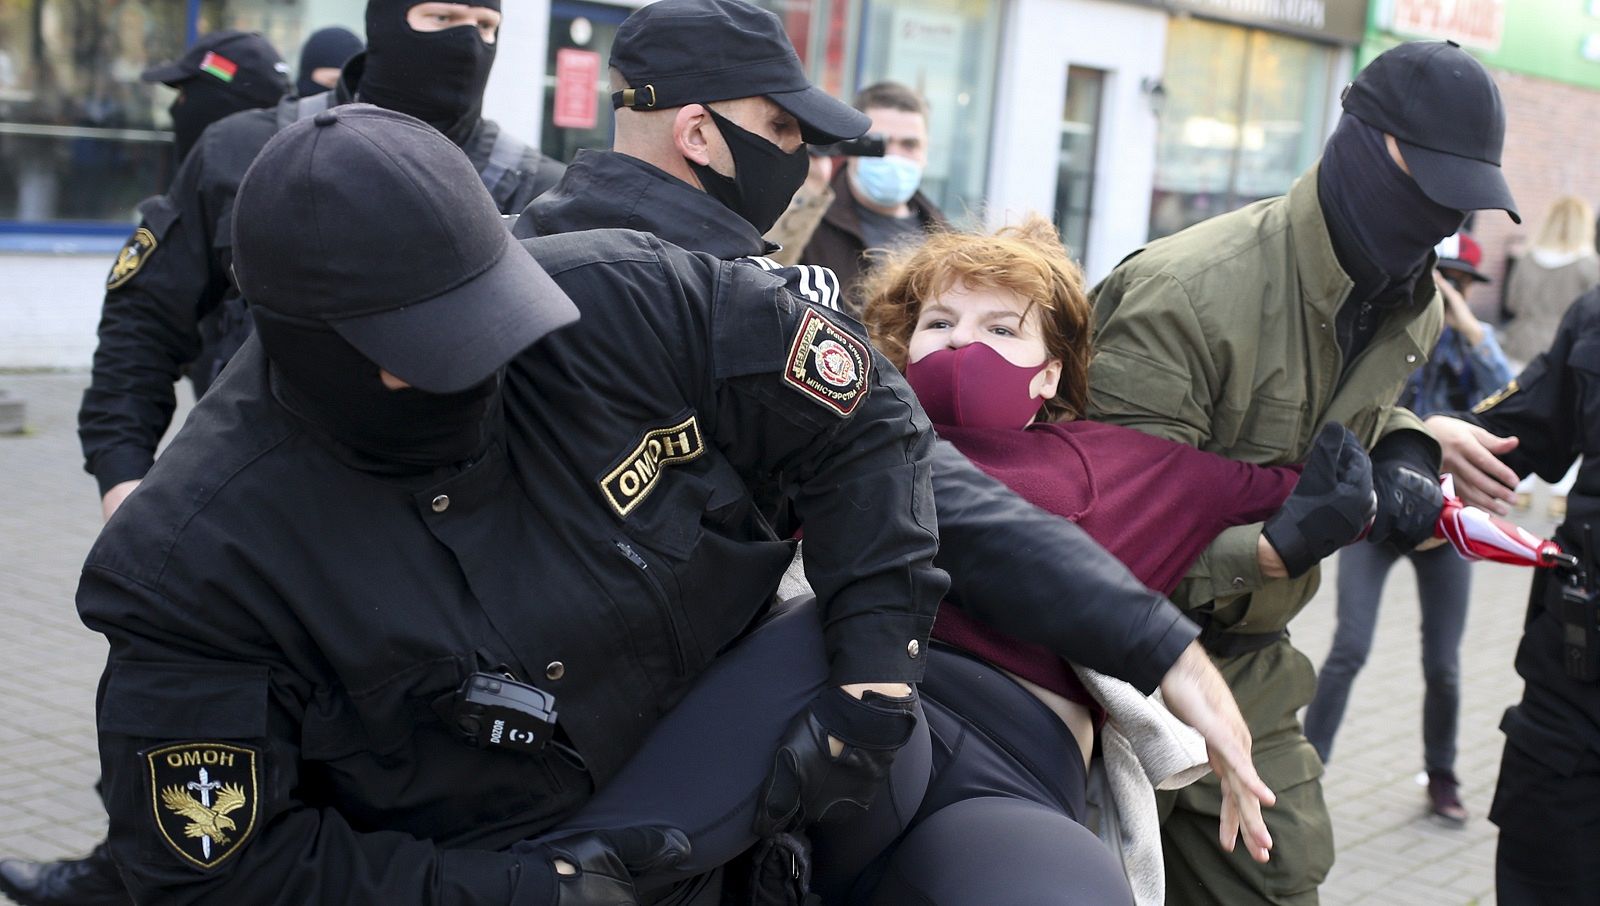 In Belarus: More than 100 detained as thousands of anti-Lukashenko protesters march - Tatahfonewsarena